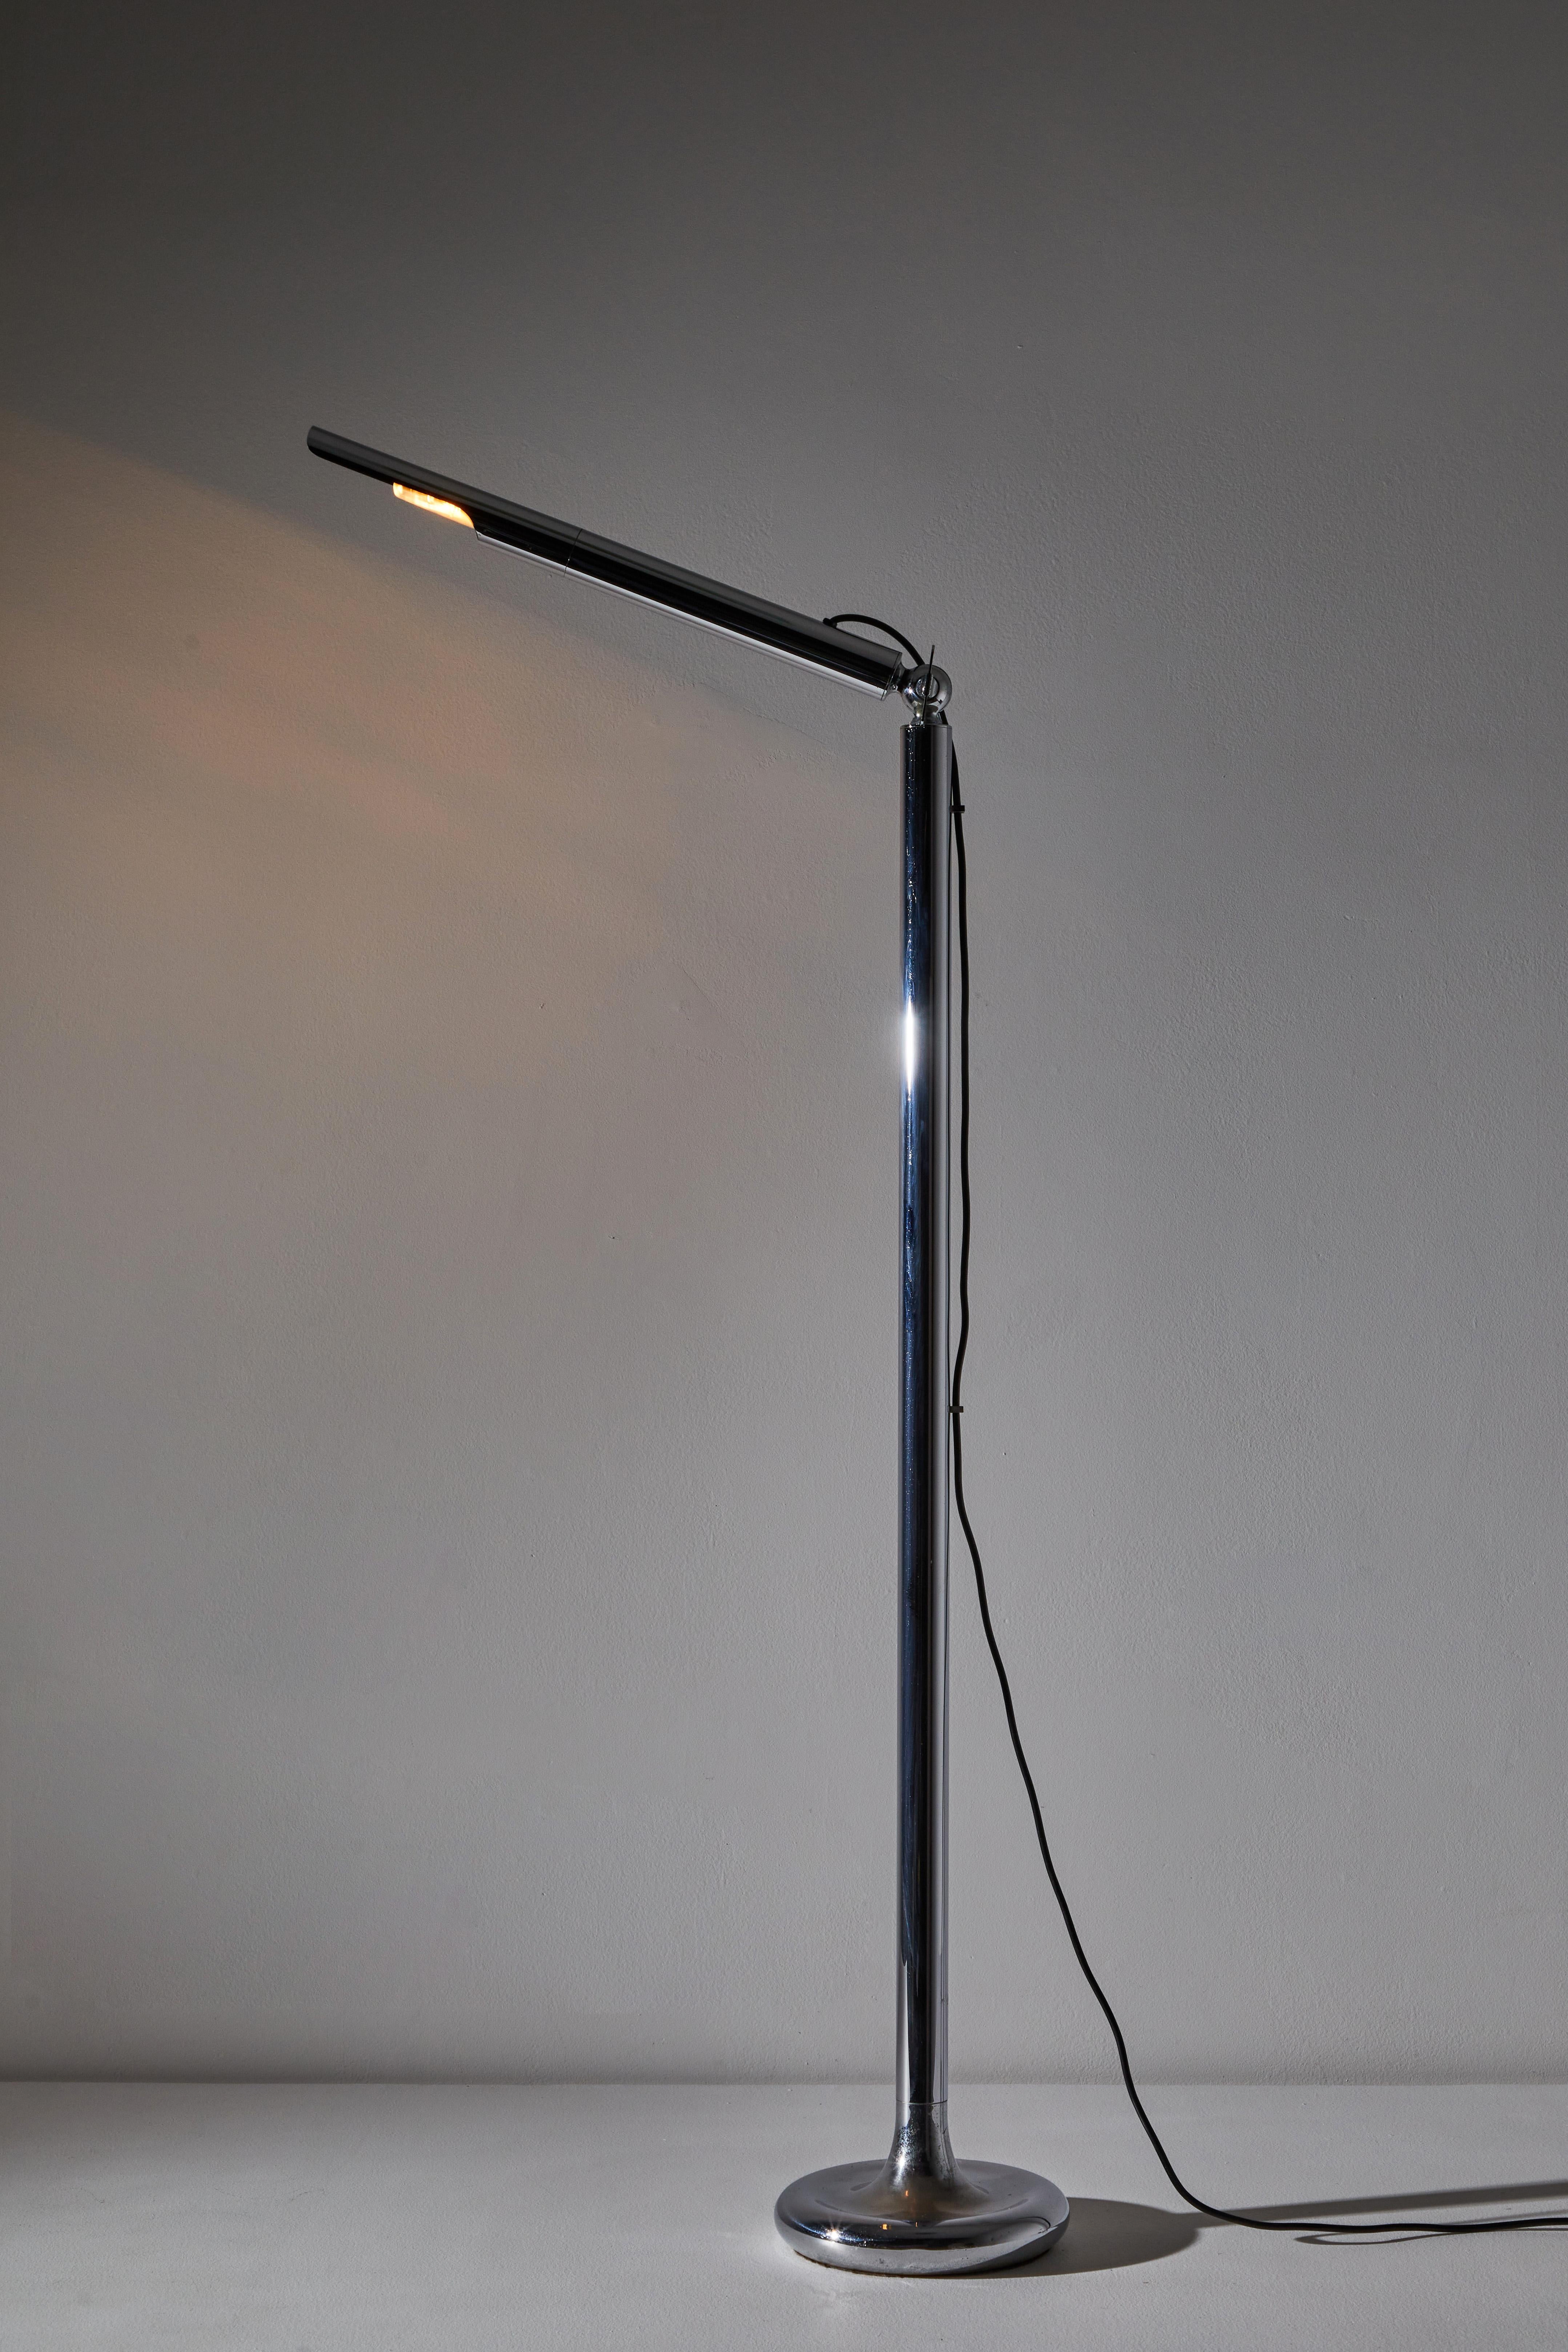 Rare floor lamp by Ingo Maurer. Designed and manufactured in Germany, circa 1960s. Chrome-plated brass. Adjustable arm by way of ball joint. Original cord. Takes one E14 60 w maximum bulb. Bulbs provided as a one time courtesy.